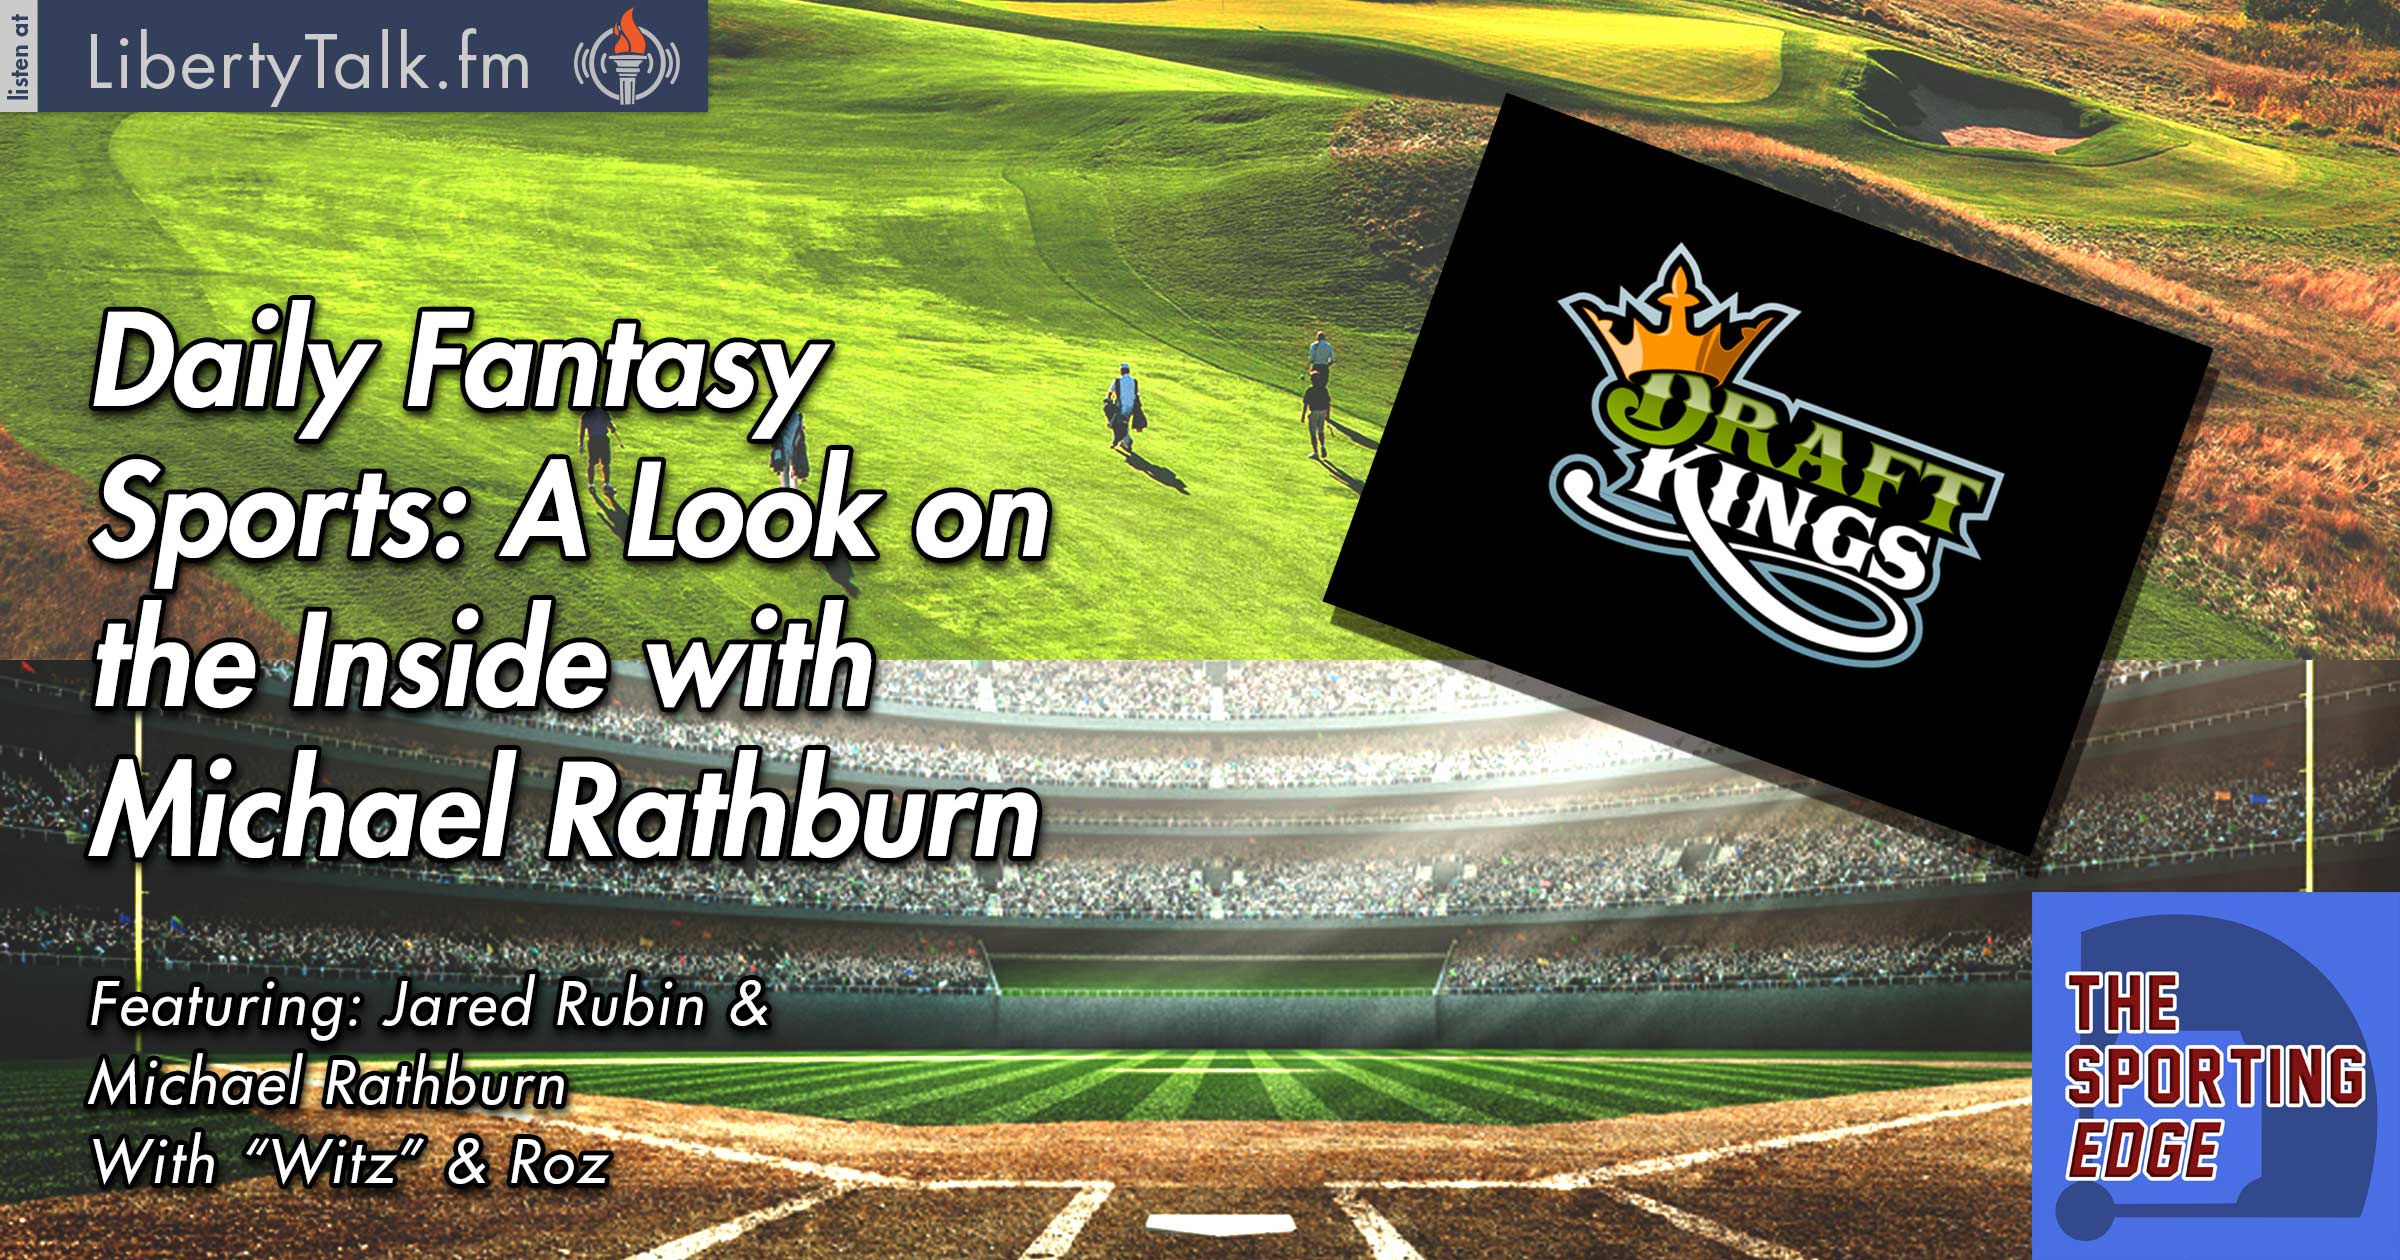 Daily Fantasy Sports and a Look on the Inside with Michael Rathburn - The Sporting Edge